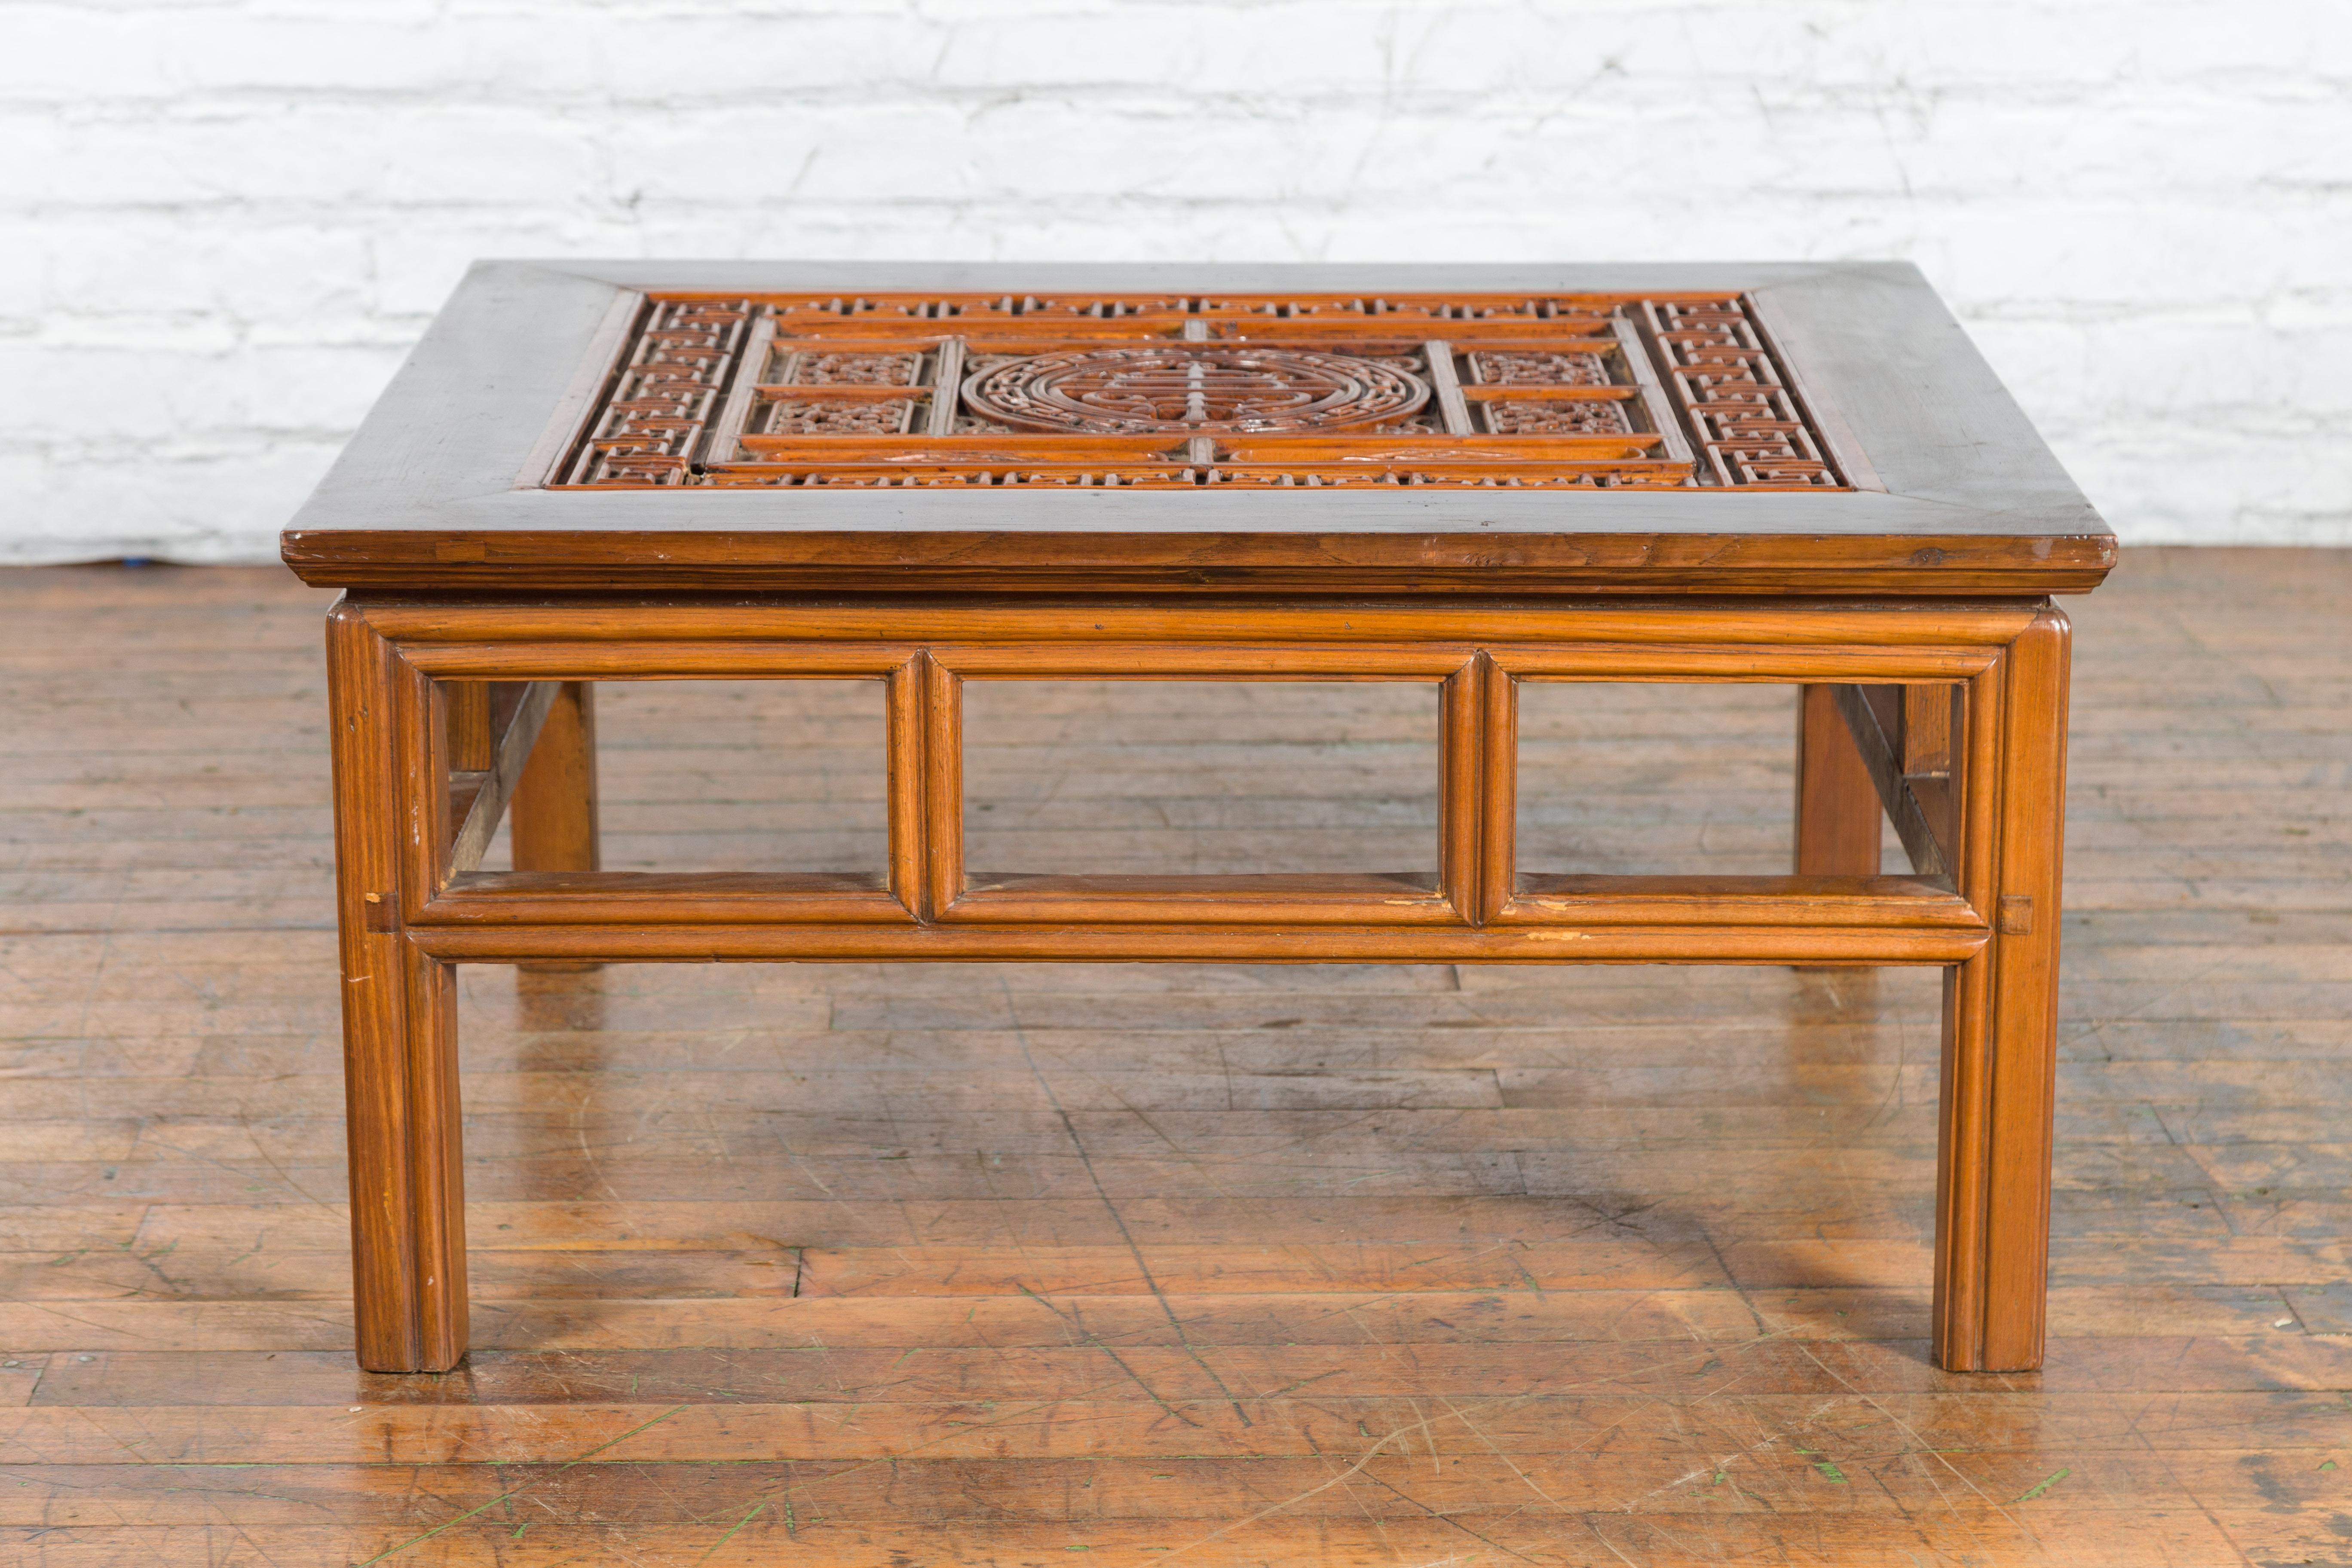 Chinese Qing Dynasty Period 19th Century Coffee Table with Carved Fretwork Top For Sale 11